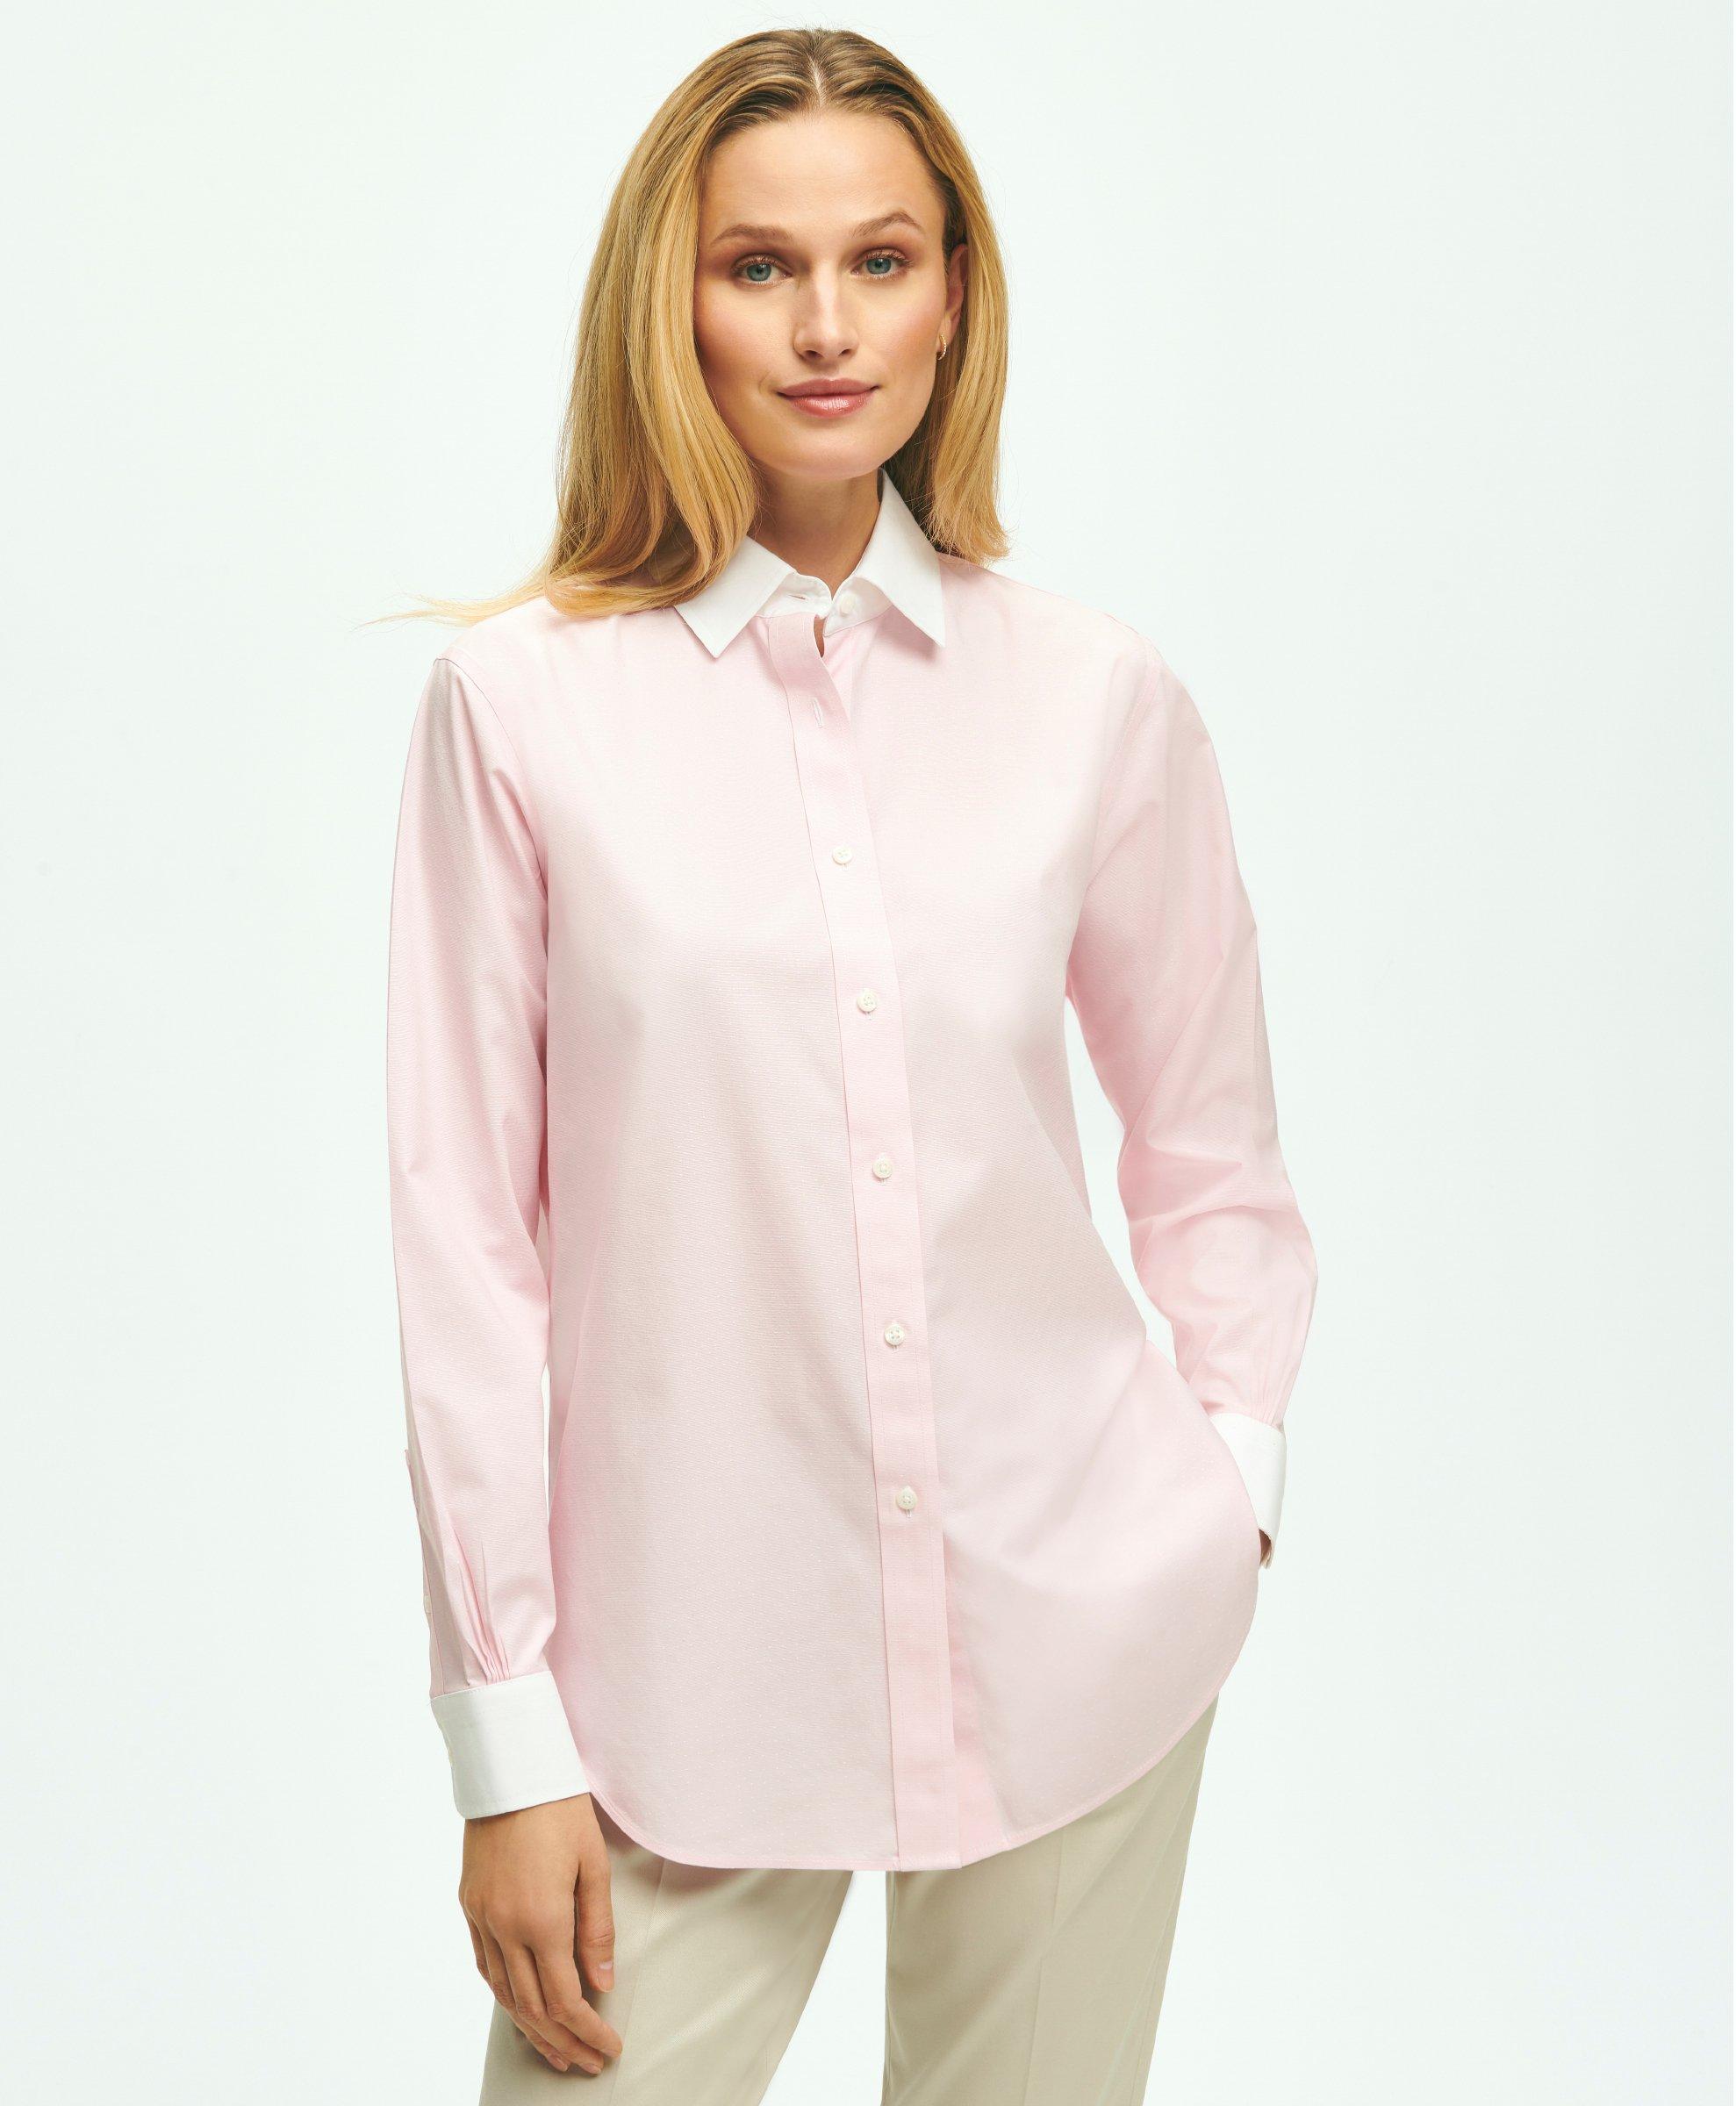 Brooks Brothers Relaxed Fit Non-iron Stretch Supima Cotton Shirt With White Collar & Cuffs | Dark Pink | Size 2